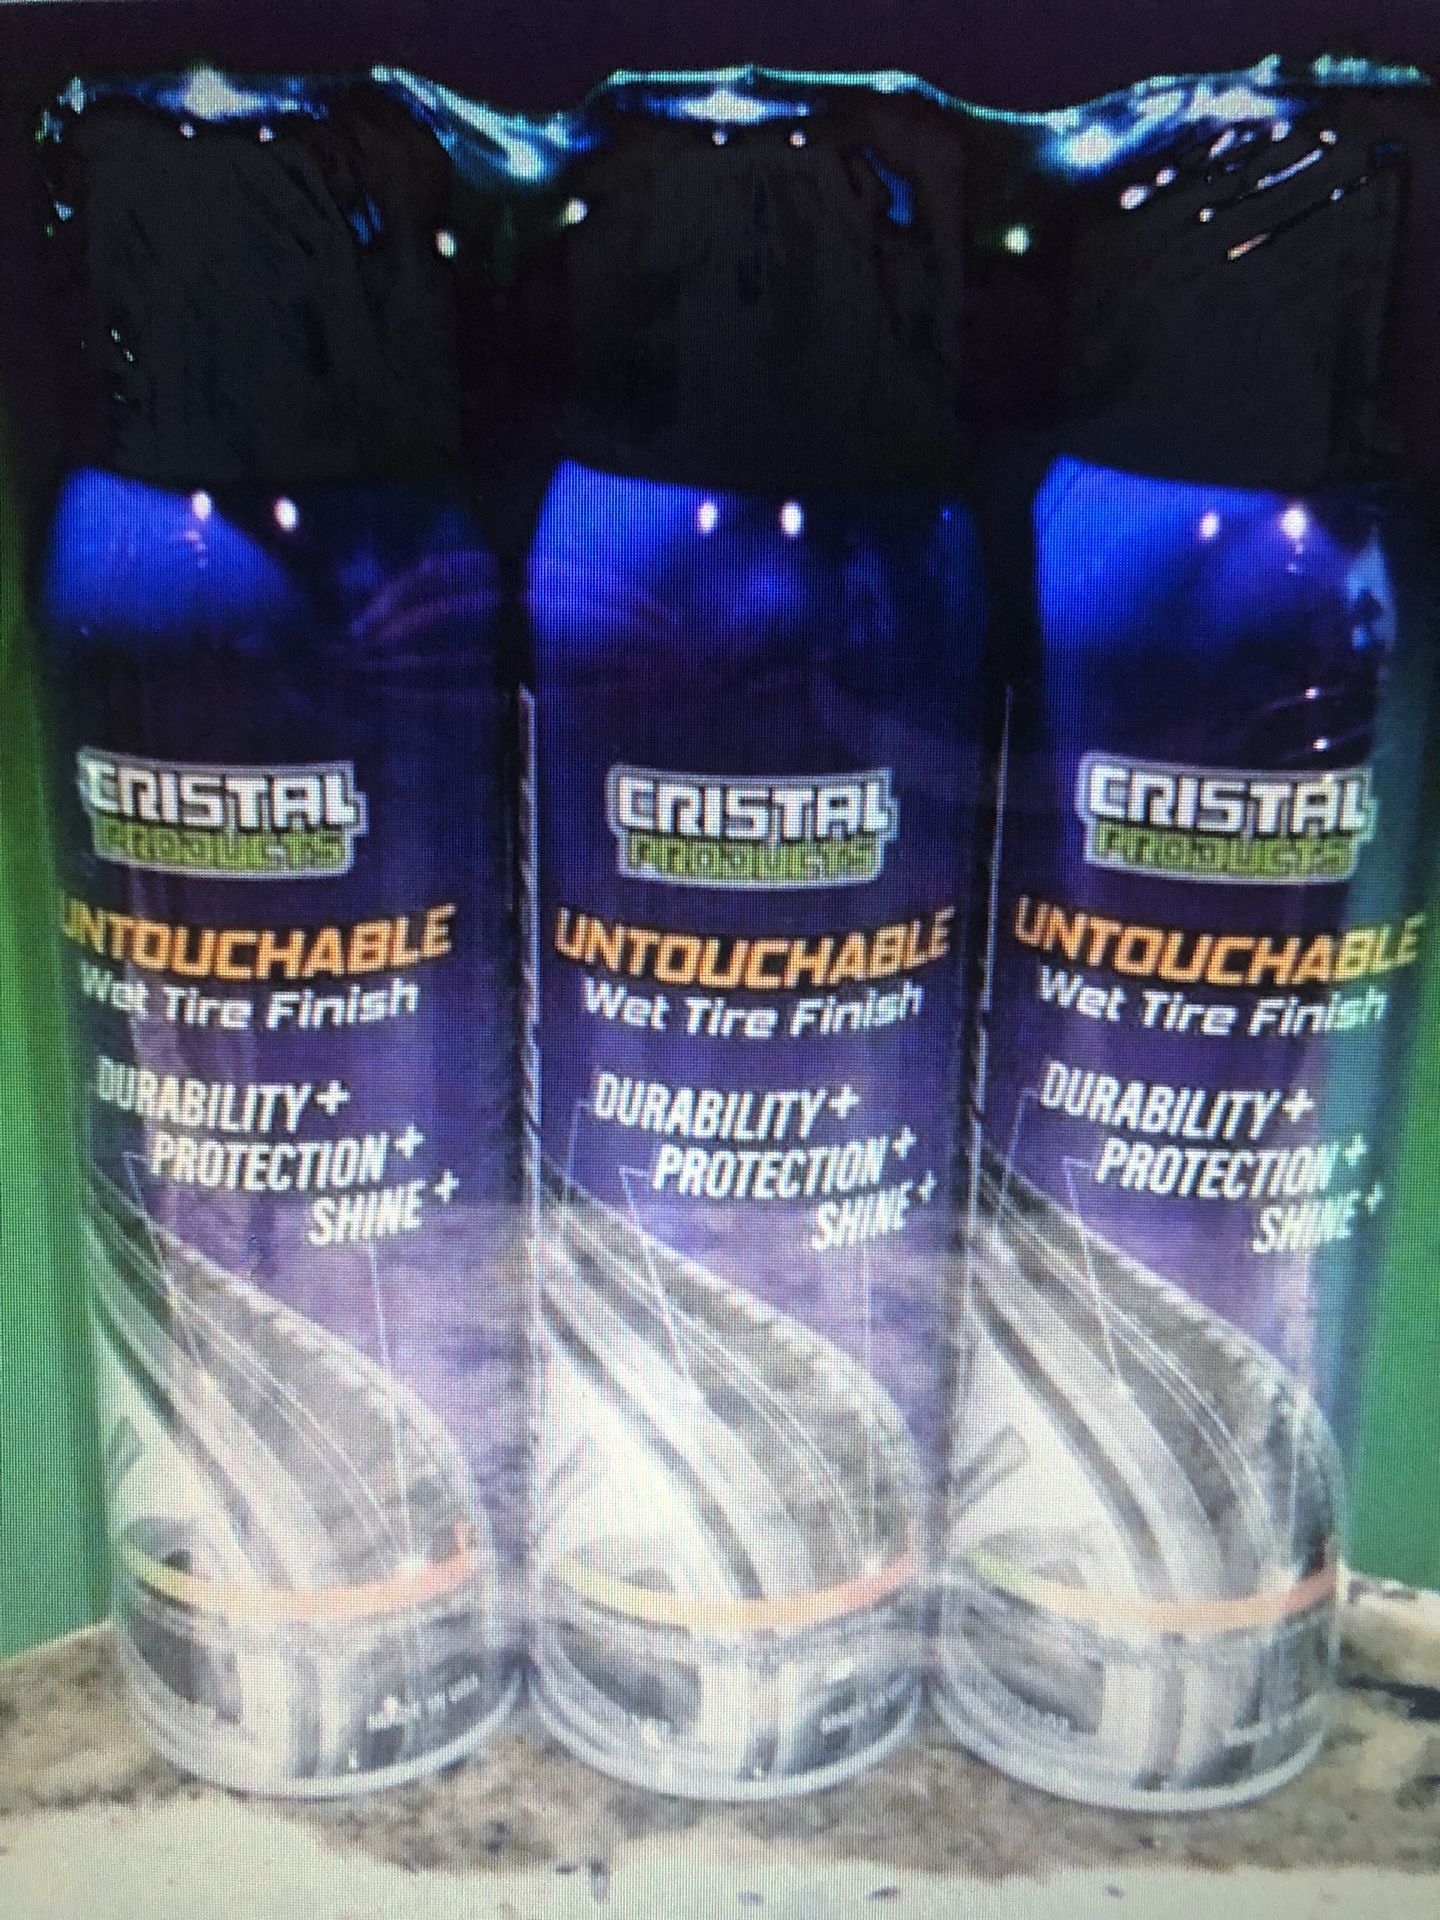 Cristal Products Untouchable Wet Tire Finish Durability Protection